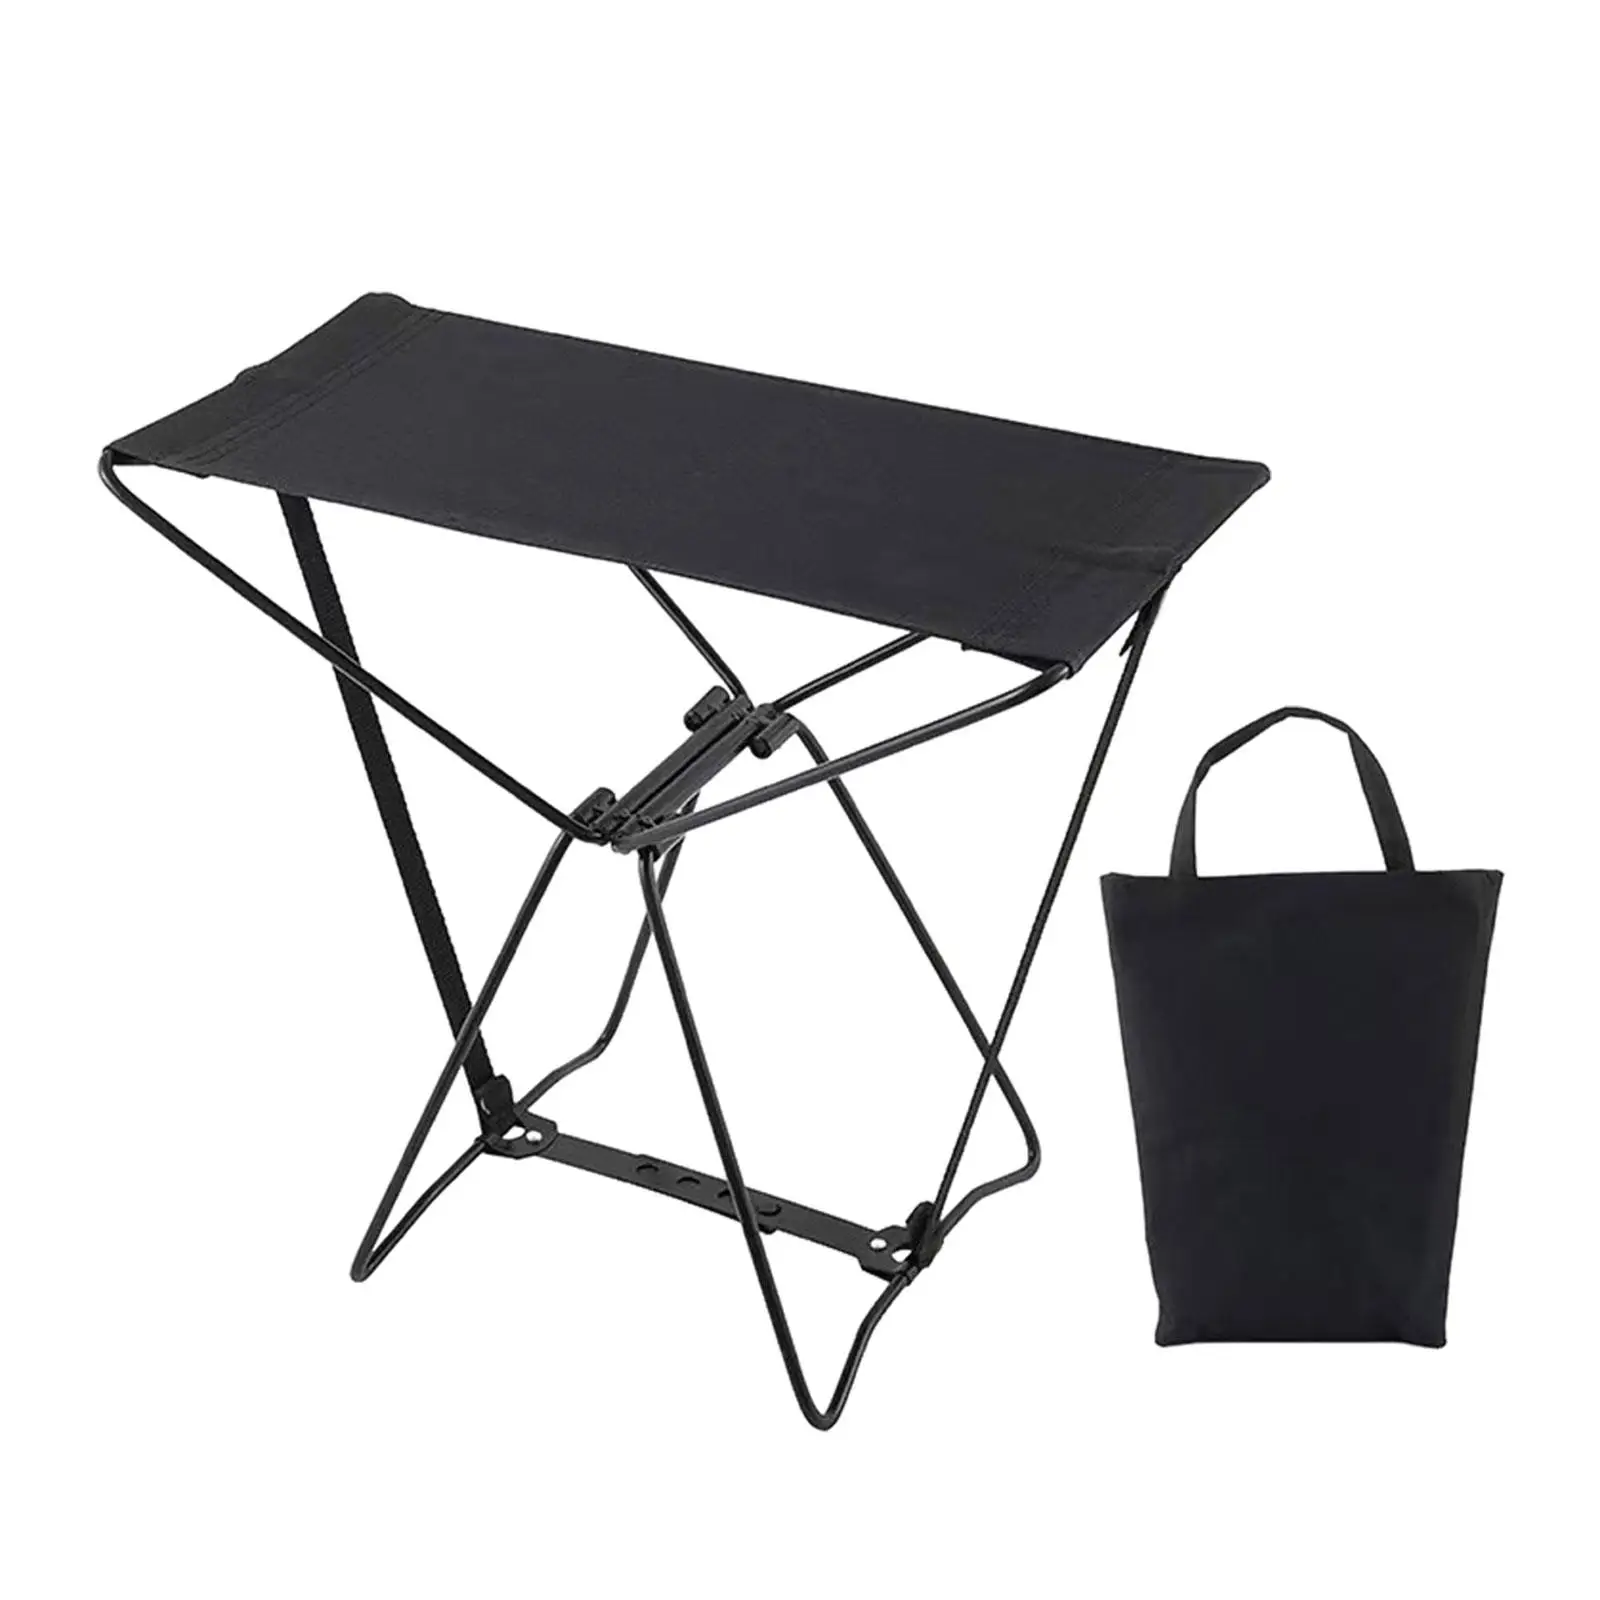 Folding Stool Folding Camp Stool Recliner Foot Rest Chair Lightweight Camping Stool for Patio Backpacking Picnic BBQ Travel